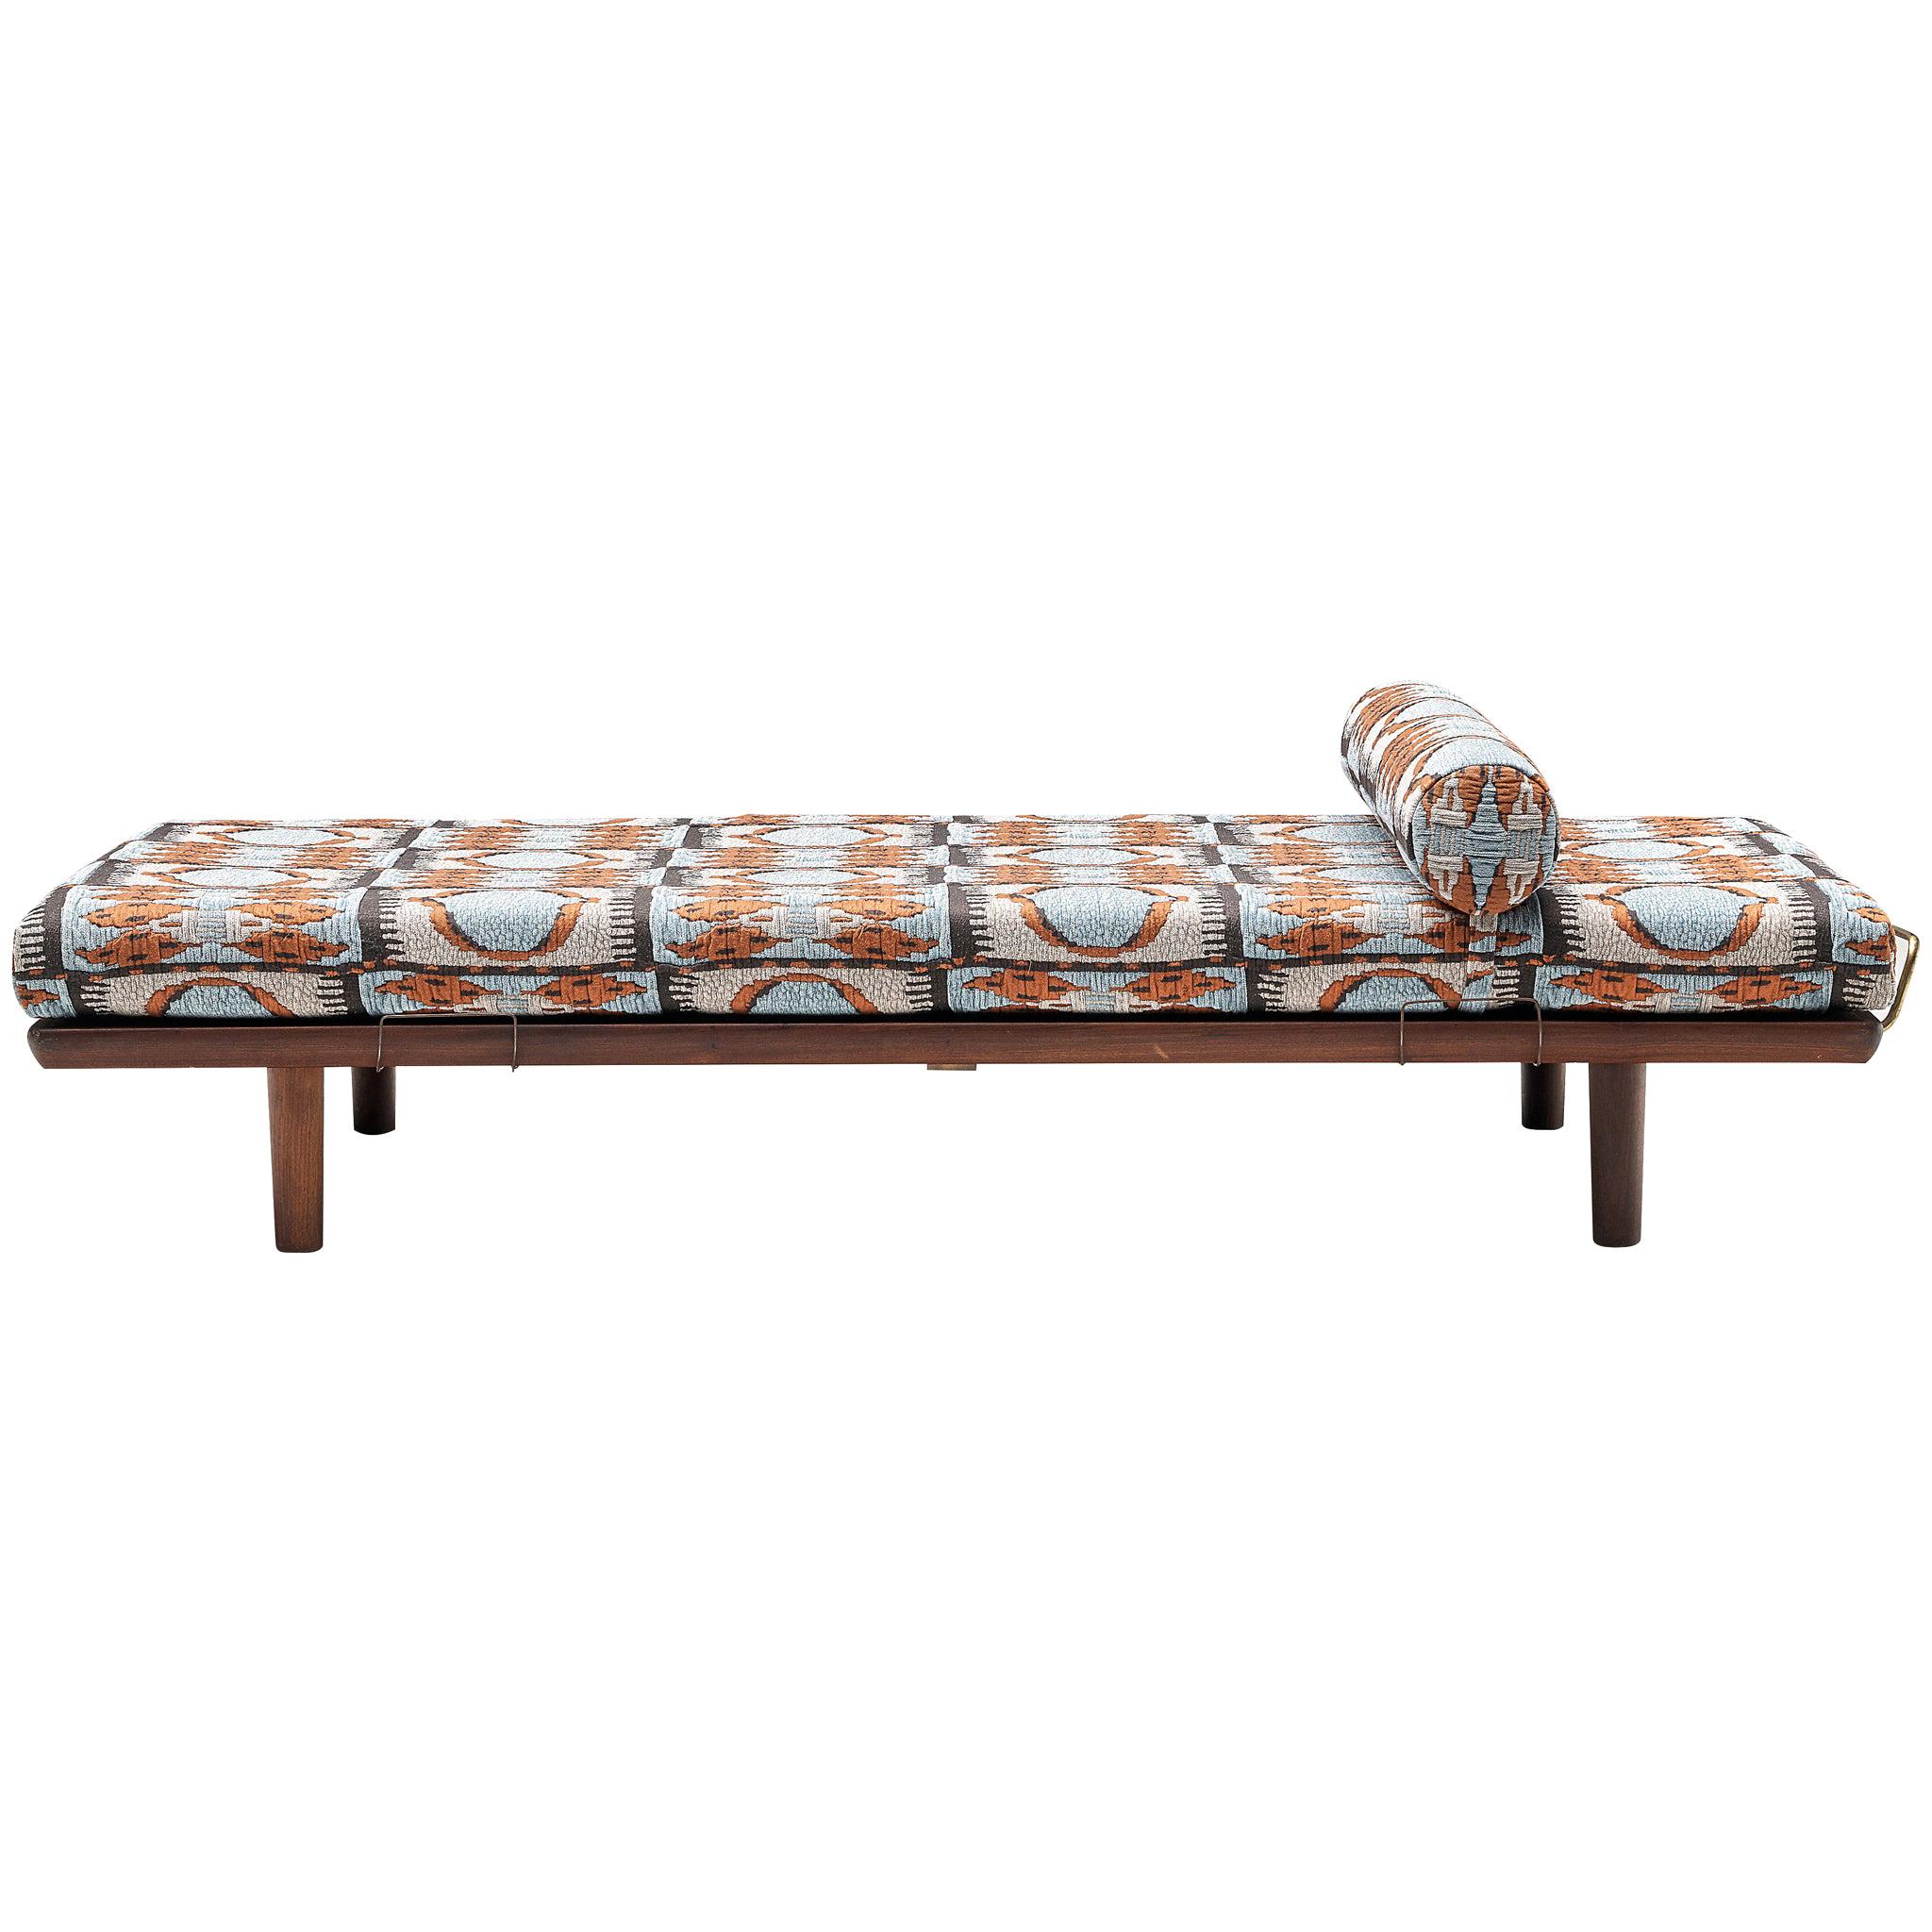 Reupholstered Daybed in Pierre Frey by Hans Wegner for GETAMA